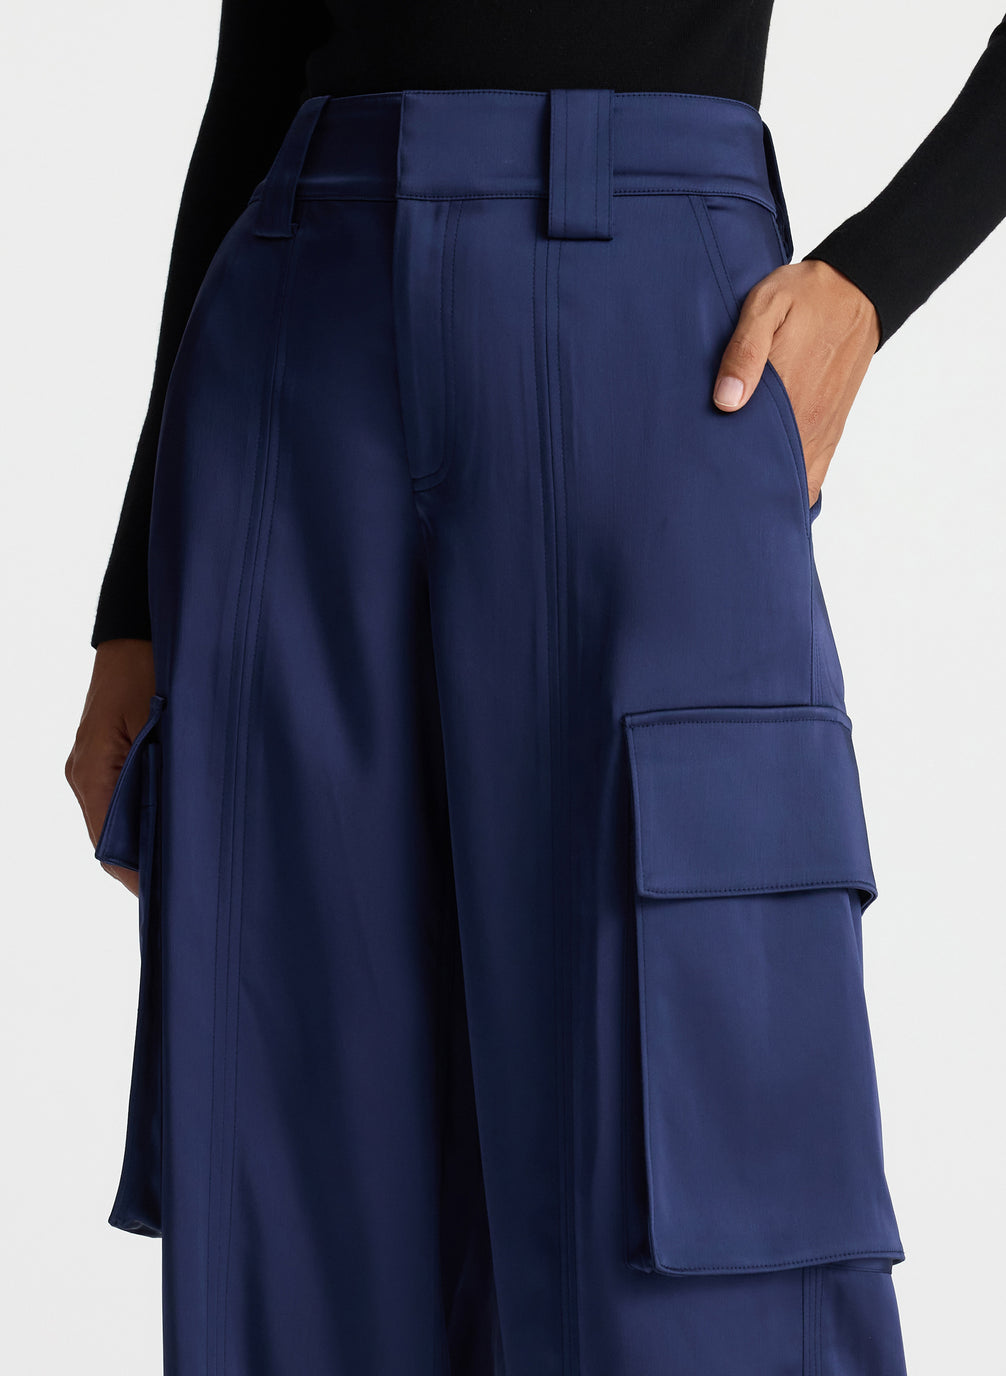 navy blue cargo pants outfit｜TikTok Search